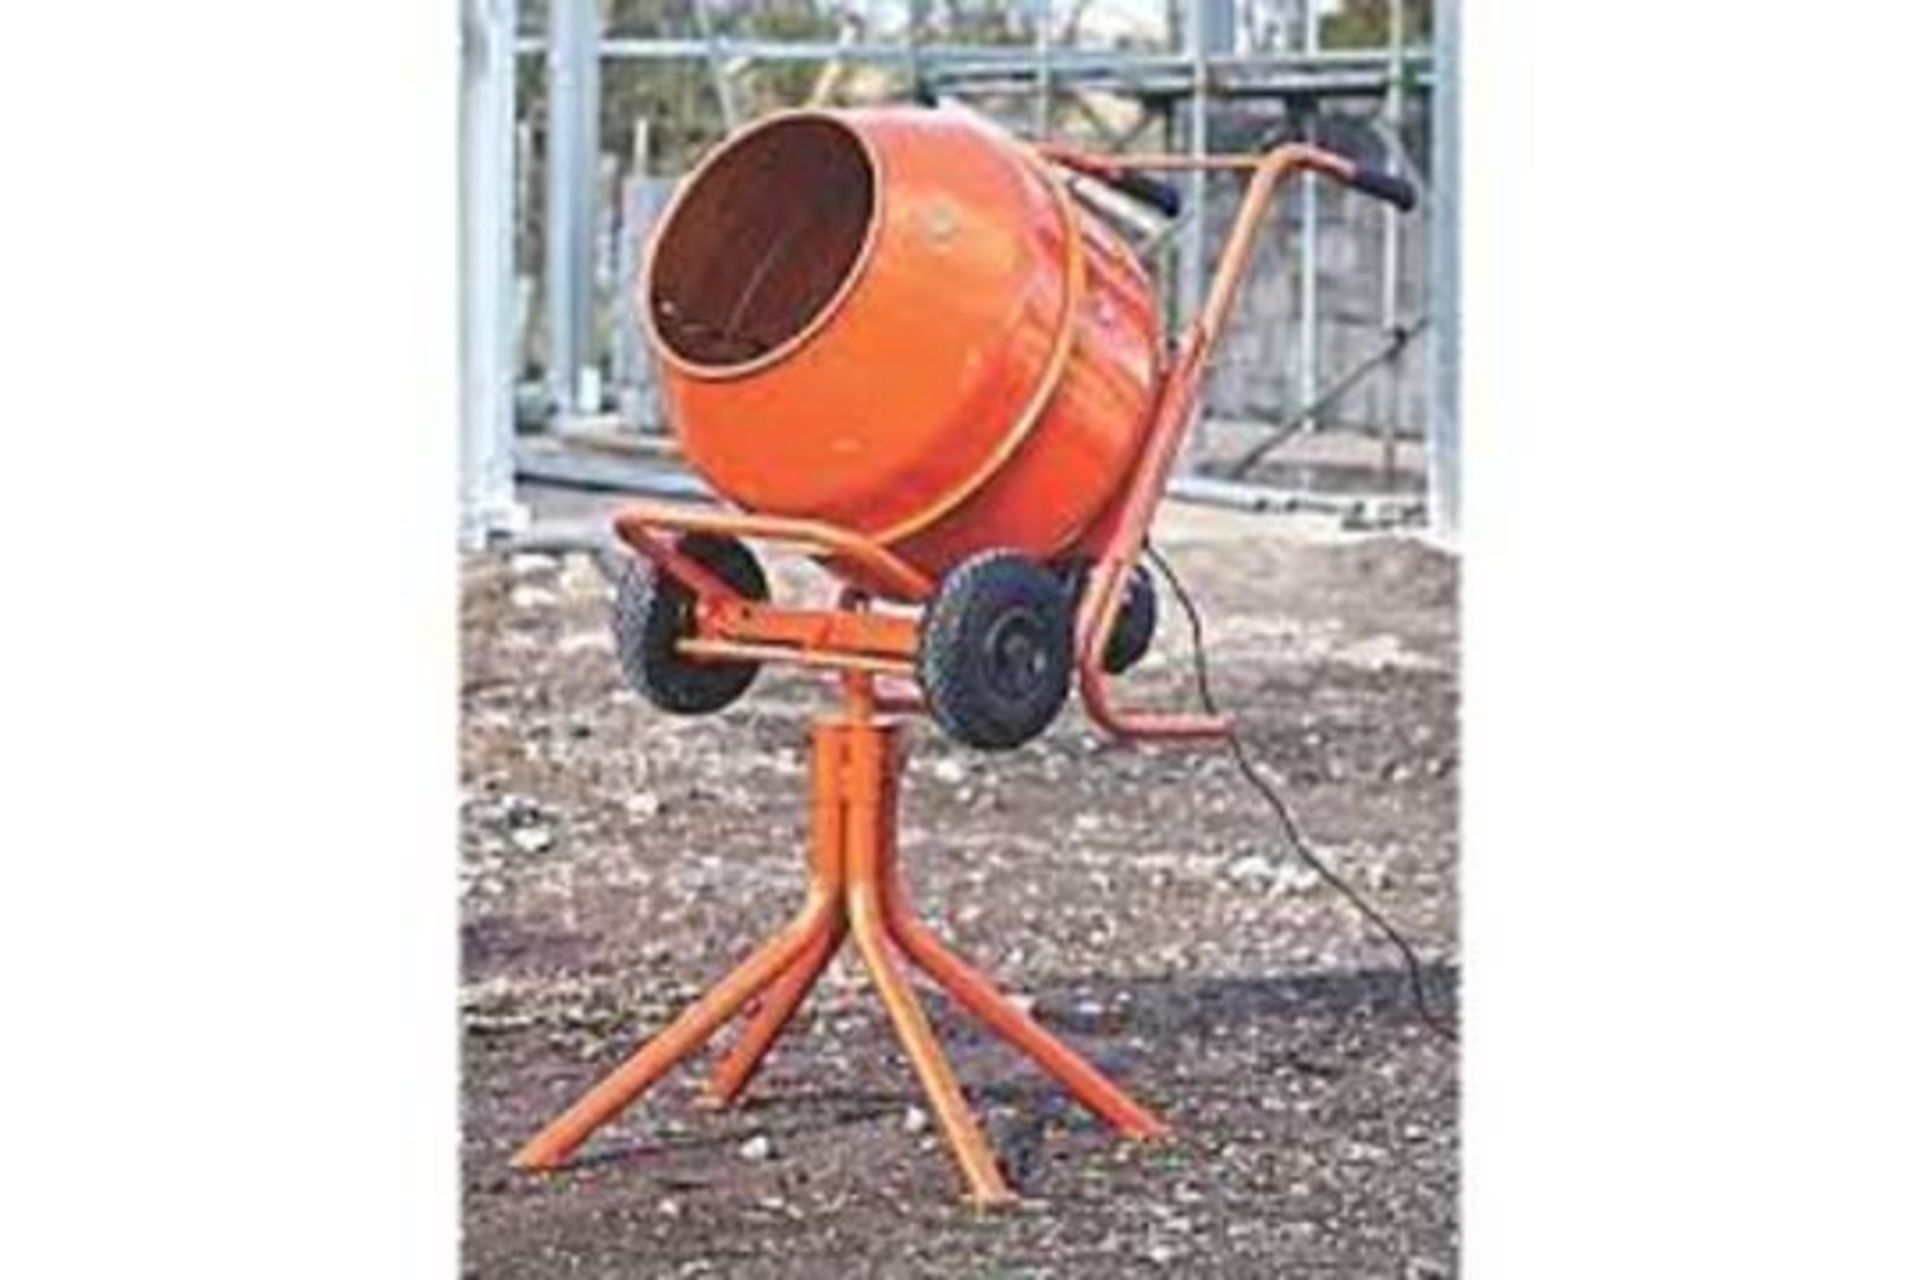 134LTR CONCRETE MIXER 230V. Upright mixer for small to medium building projects. Light and - Image 2 of 2